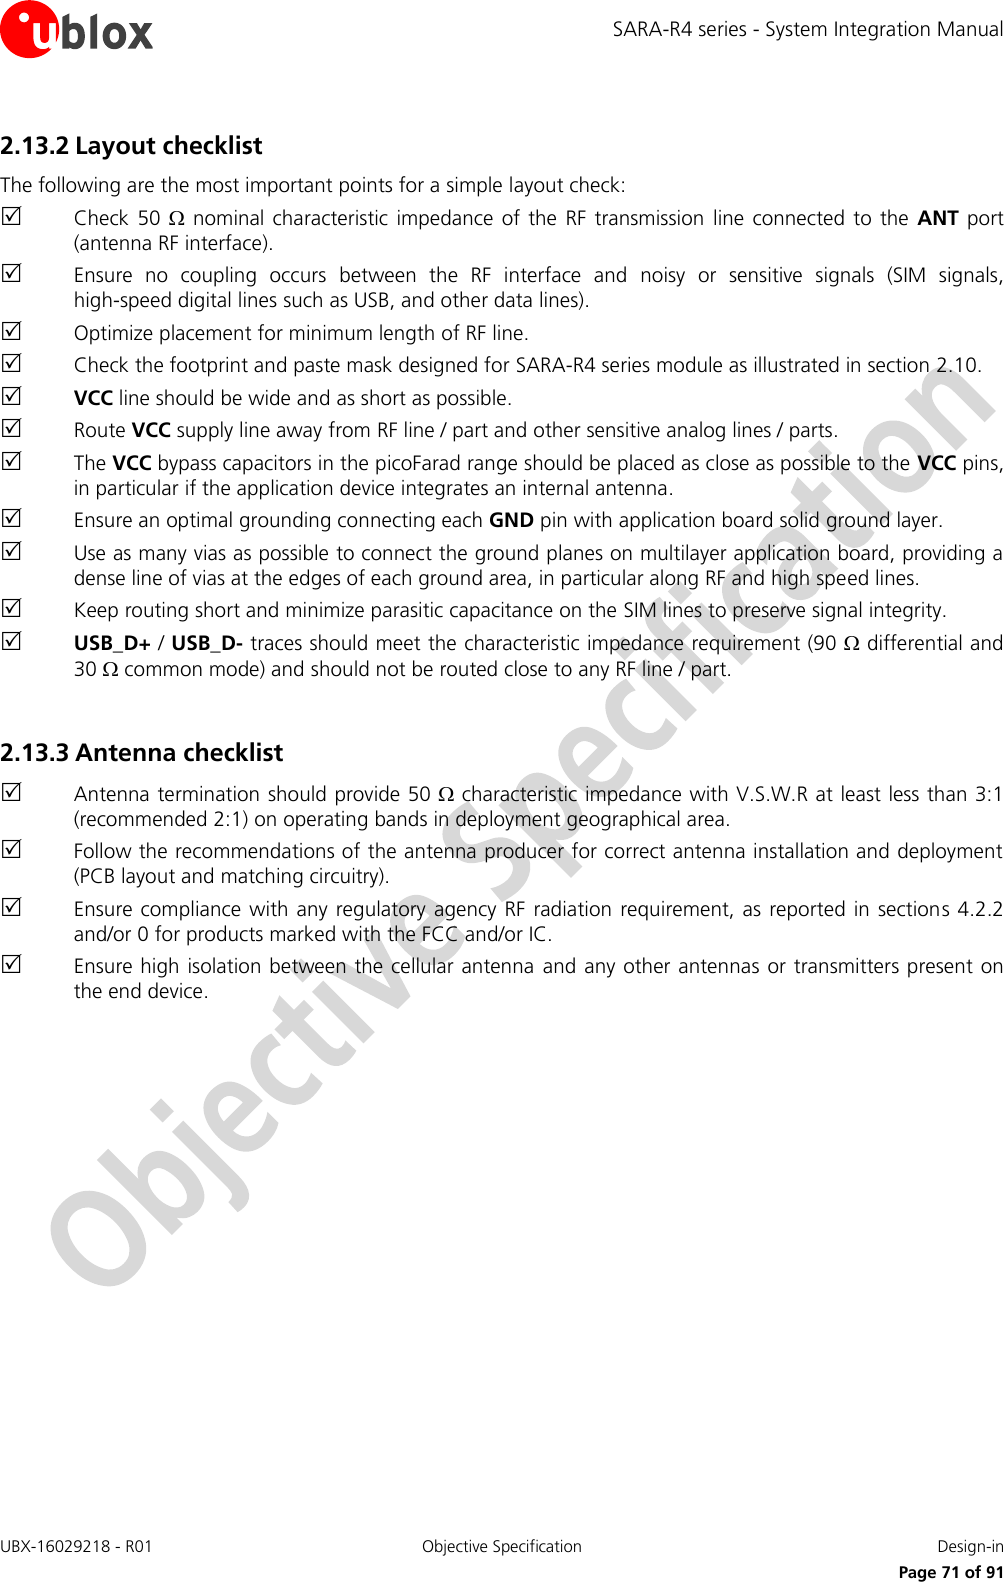 SARA-R4 series - System Integration Manual UBX-16029218 - R01  Objective Specification  Design-in     Page 71 of 91 2.13.2 Layout checklist The following are the most important points for a simple layout check:  Check  50    nominal characteristic  impedance of  the  RF transmission  line  connected to  the ANT port (antenna RF interface).  Ensure  no  coupling  occurs  between  the  RF  interface  and  noisy  or  sensitive  signals  (SIM  signals, high-speed digital lines such as USB, and other data lines).  Optimize placement for minimum length of RF line.  Check the footprint and paste mask designed for SARA-R4 series module as illustrated in section 2.10.  VCC line should be wide and as short as possible.  Route VCC supply line away from RF line / part and other sensitive analog lines / parts.  The VCC bypass capacitors in the picoFarad range should be placed as close as possible to the VCC pins, in particular if the application device integrates an internal antenna.  Ensure an optimal grounding connecting each GND pin with application board solid ground layer.  Use as many vias as possible to connect the ground planes on multilayer application board, providing a dense line of vias at the edges of each ground area, in particular along RF and high speed lines.  Keep routing short and minimize parasitic capacitance on the SIM lines to preserve signal integrity.  USB_D+ / USB_D- traces should meet the characteristic impedance requirement (90  differential and 30  common mode) and should not be routed close to any RF line / part.  2.13.3 Antenna checklist  Antenna termination should provide 50  characteristic impedance with V.S.W.R at least less than 3:1 (recommended 2:1) on operating bands in deployment geographical area.  Follow the recommendations of the antenna producer for correct antenna installation and deployment (PCB layout and matching circuitry).  Ensure compliance  with any regulatory  agency  RF radiation  requirement, as reported  in  sections 4.2.2 and/or 0 for products marked with the FCC and/or IC.  Ensure high isolation between the cellular antenna  and any other antennas  or transmitters present on the end device.  